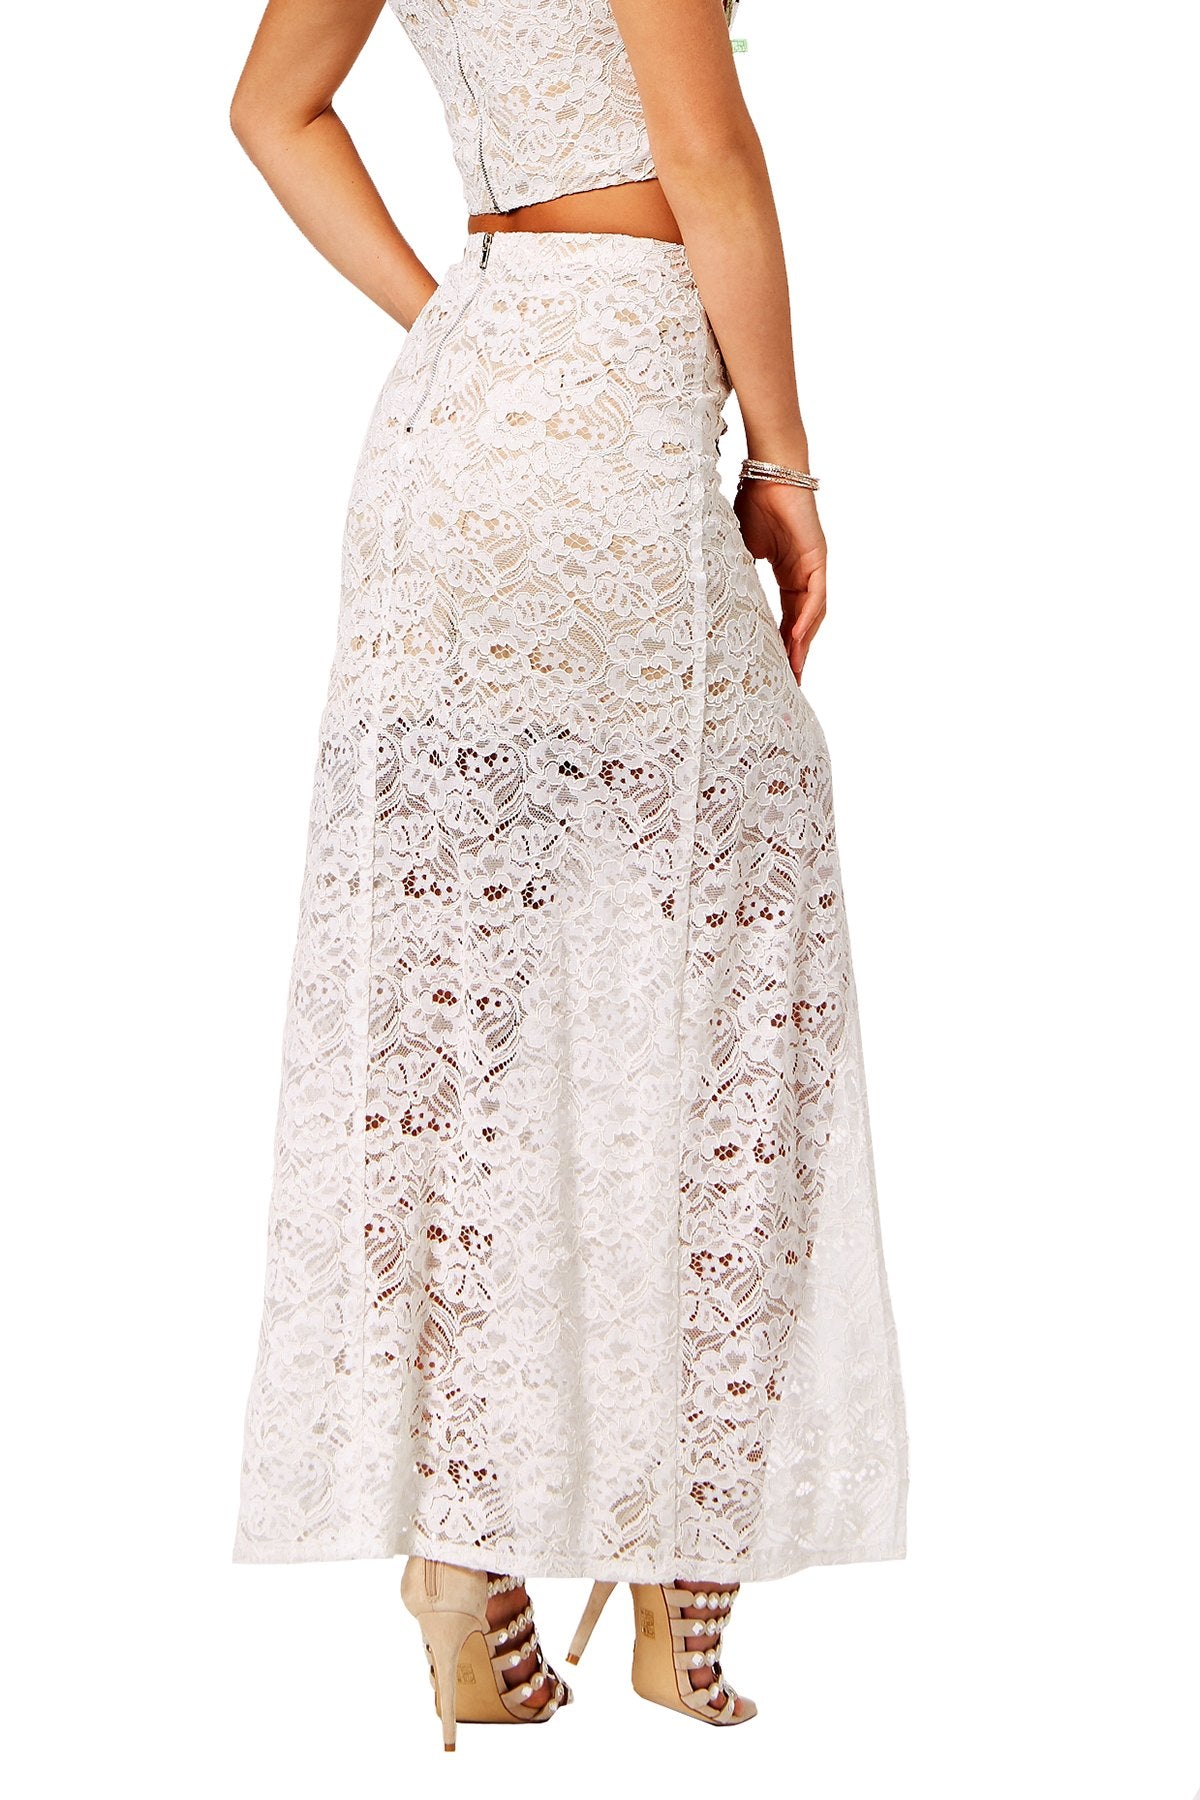 Crystal Doll Ivory Juniors' Embroidered Lace Maxi Skirt